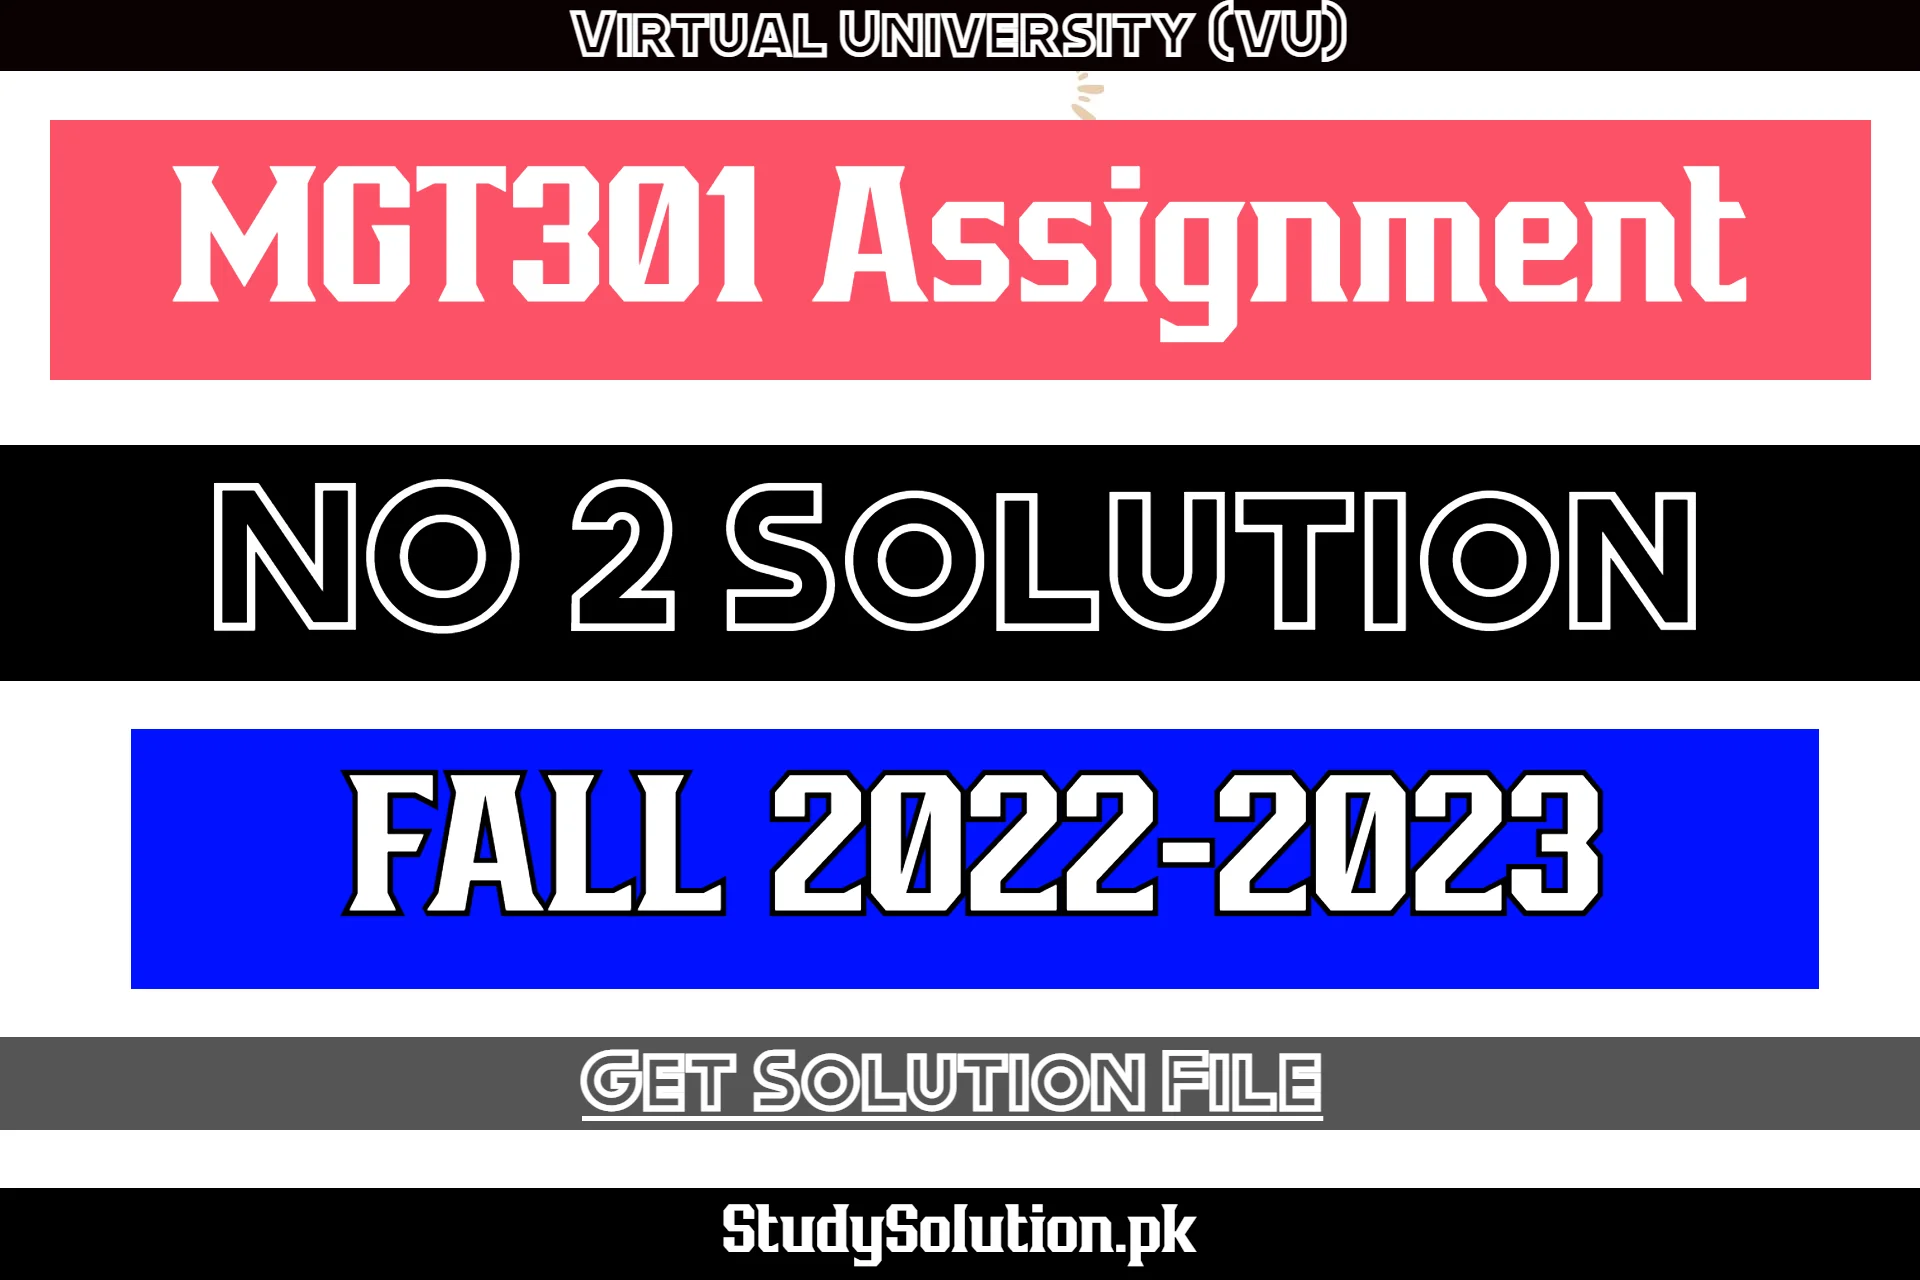 MGT301 Assignment No 2 Solution Fall 2022